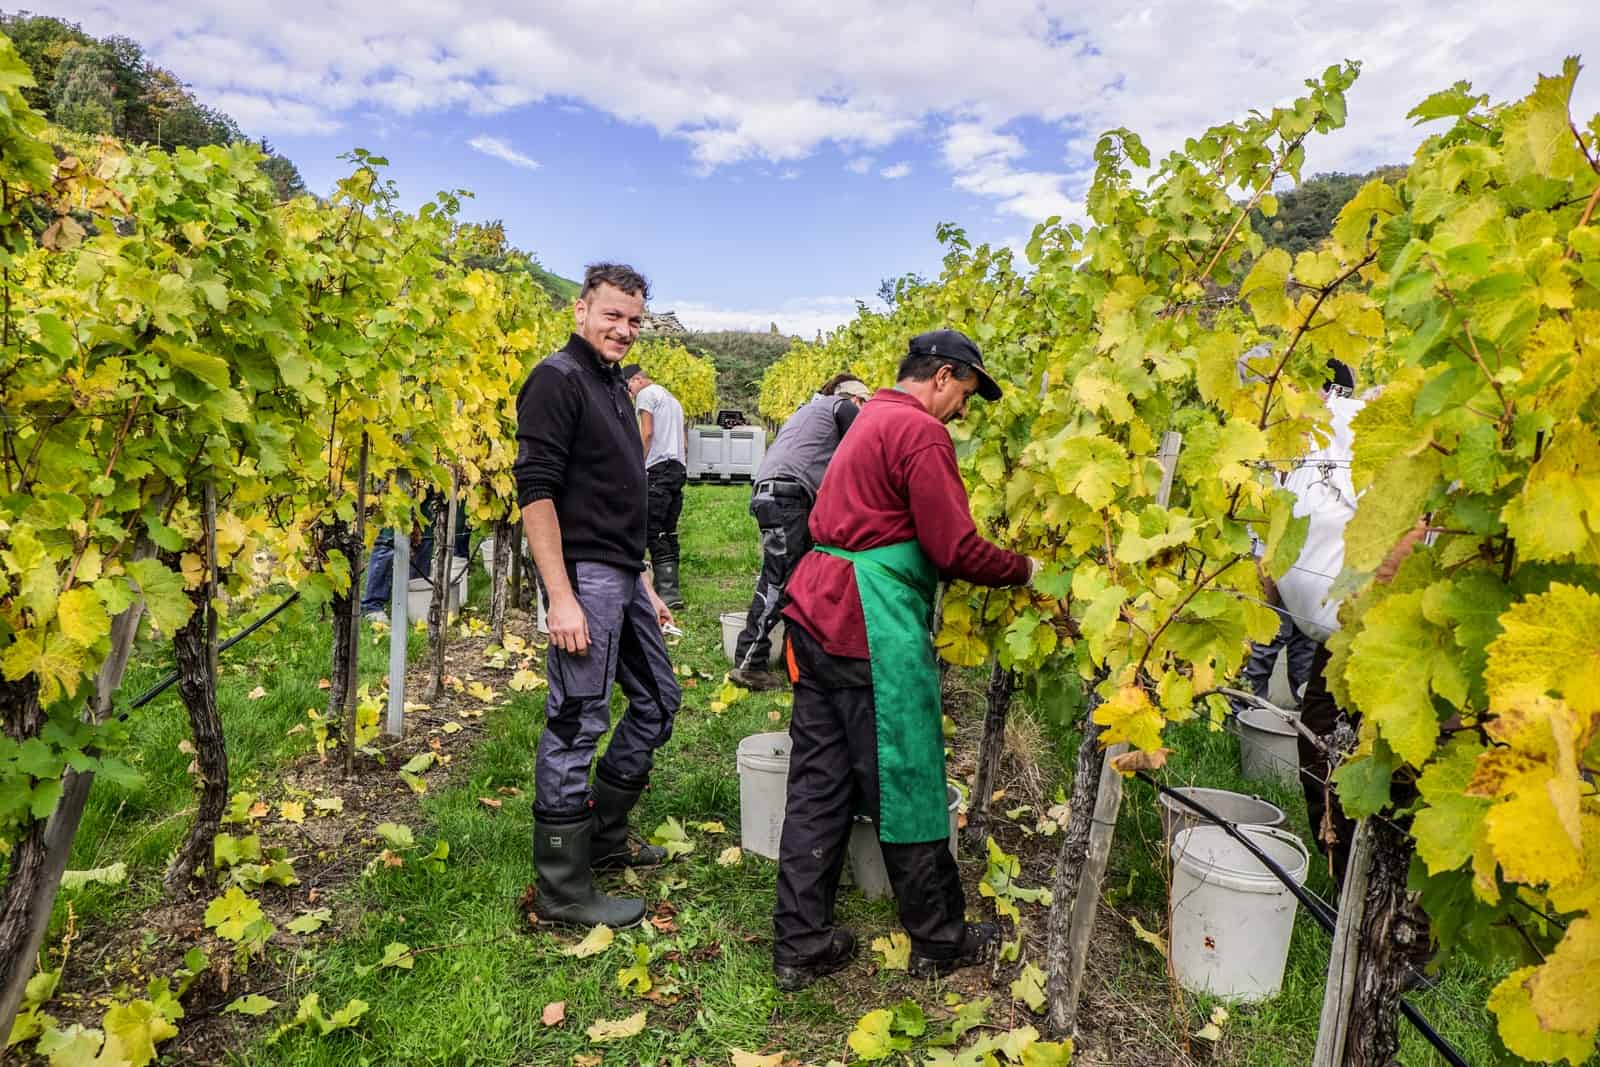 Karl Lagler, owner of Lagners Vineyard in Spitz oversees volunteers at a grape harvest in the green and yellow vine rows